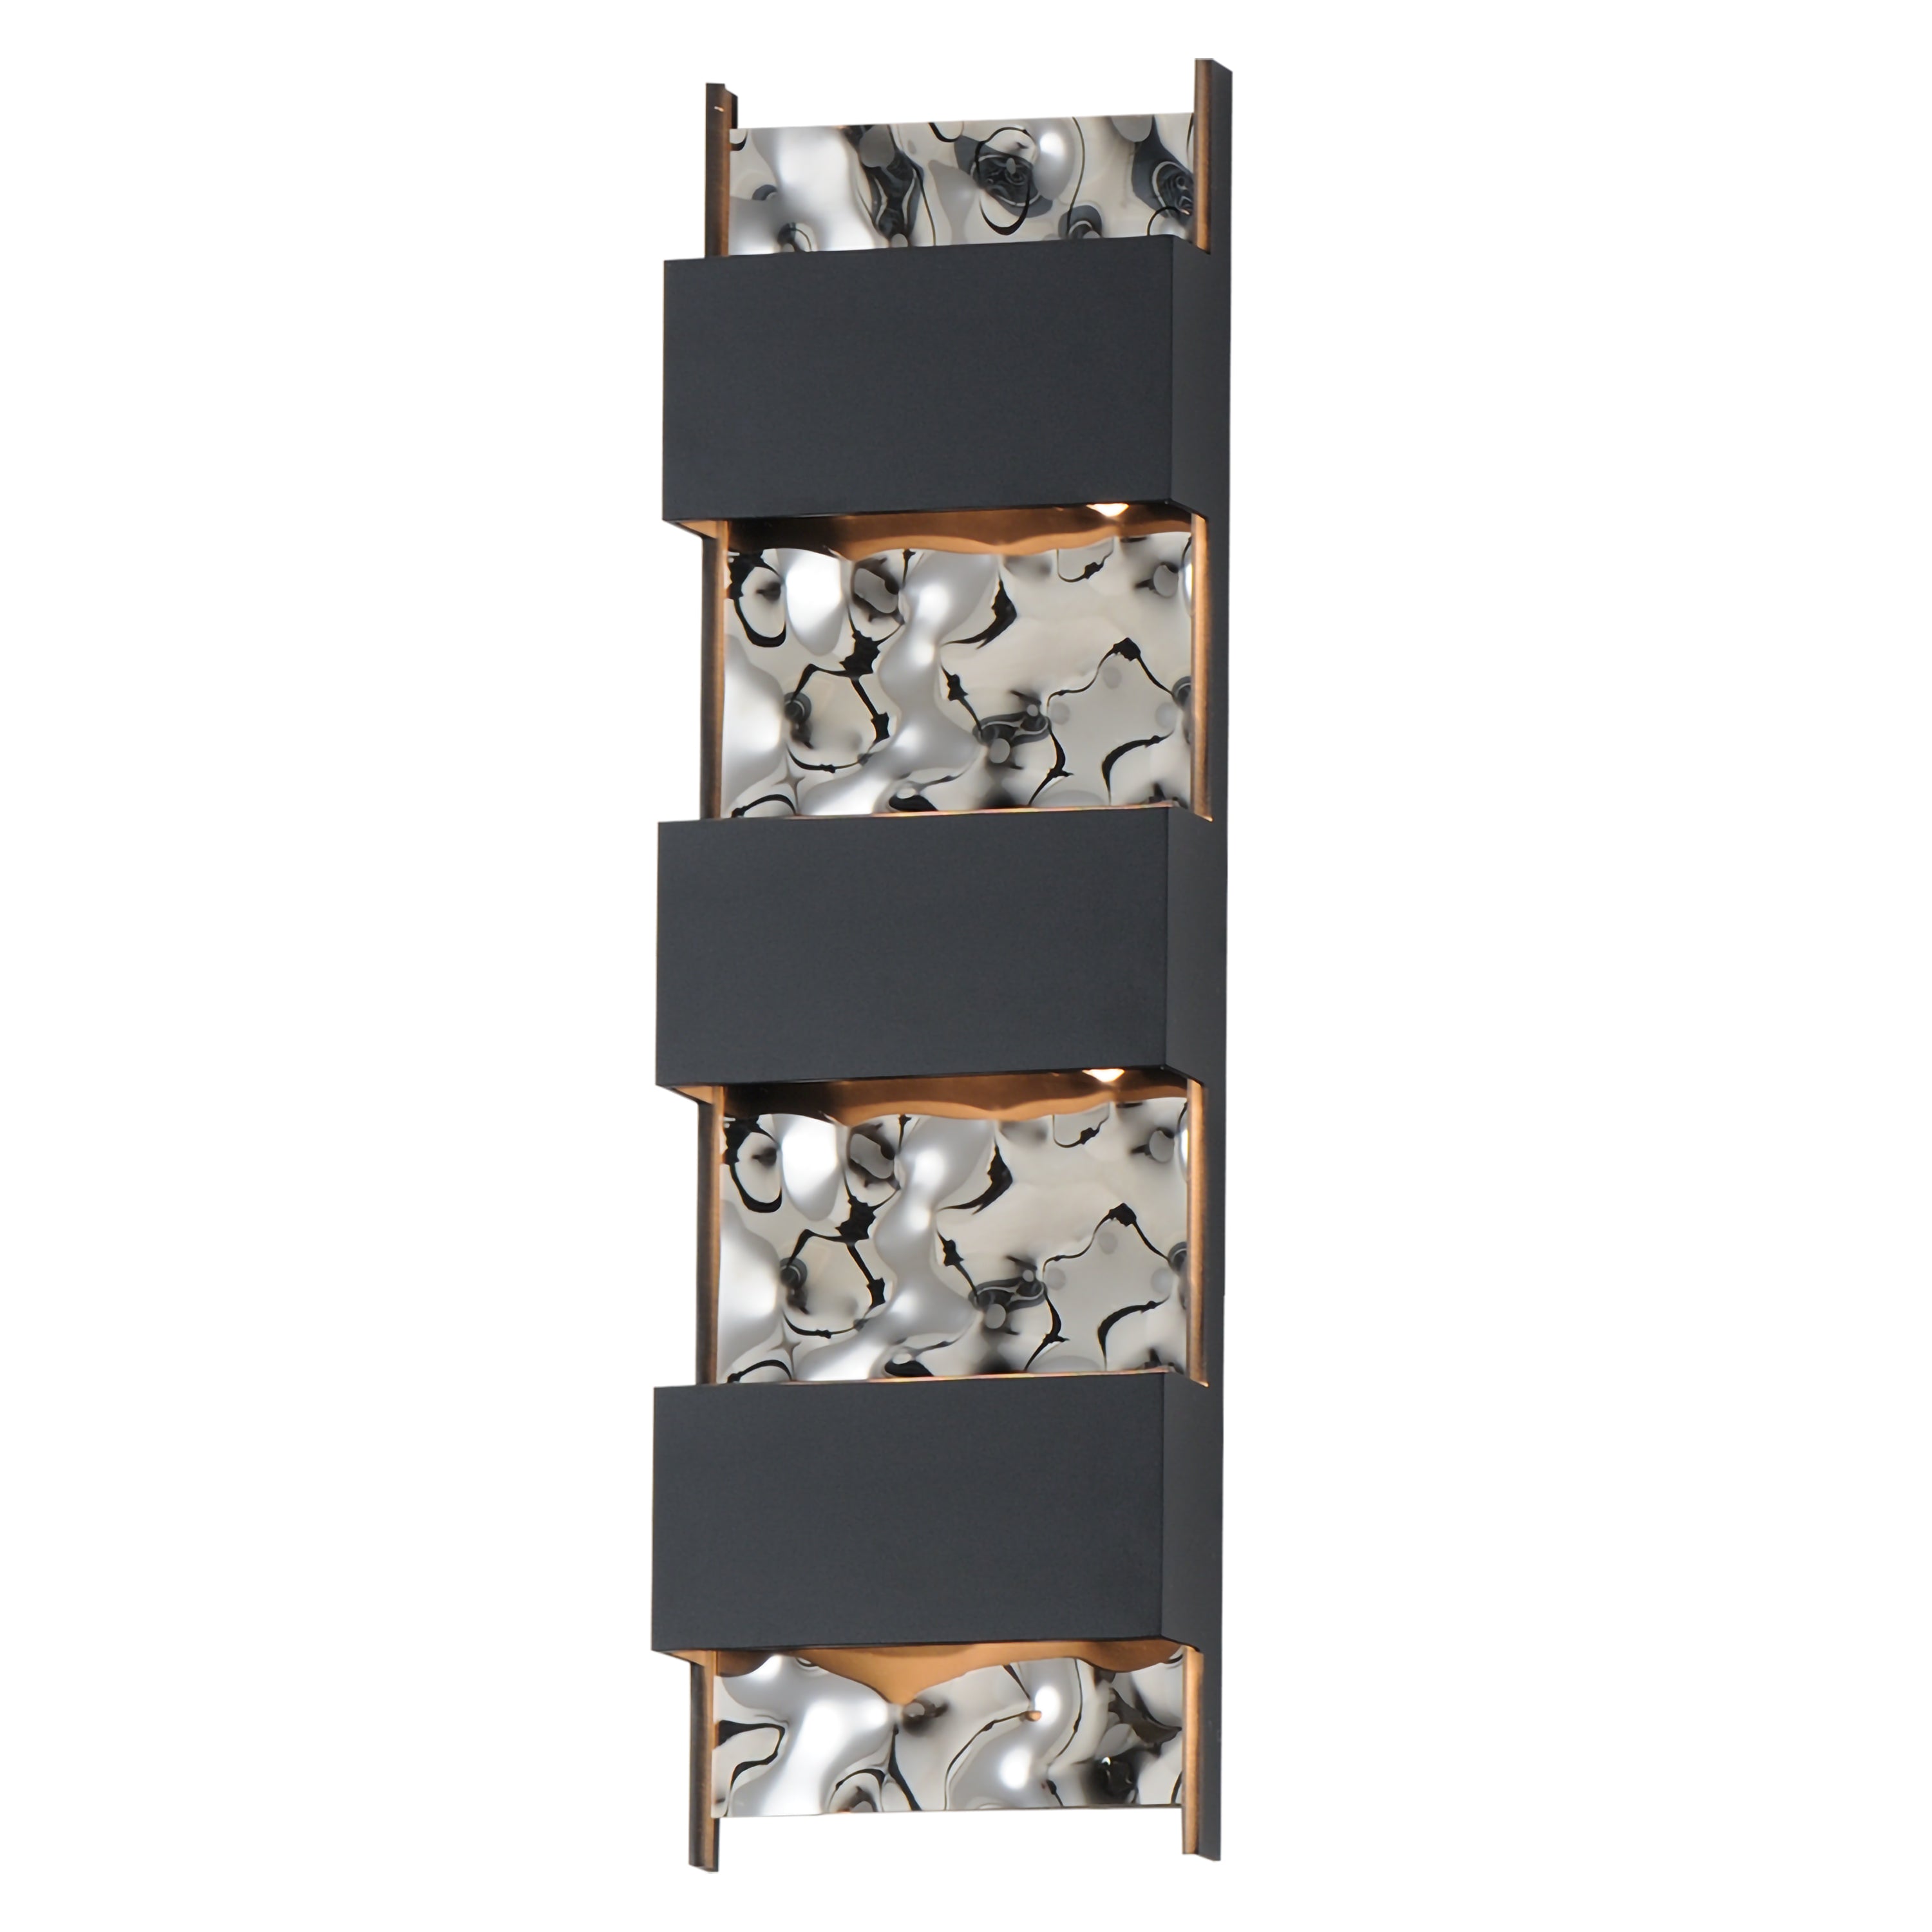 Coulee-Outdoor Wall Mount Outdoor l Wall ET2 x6.25x20.5 Black 